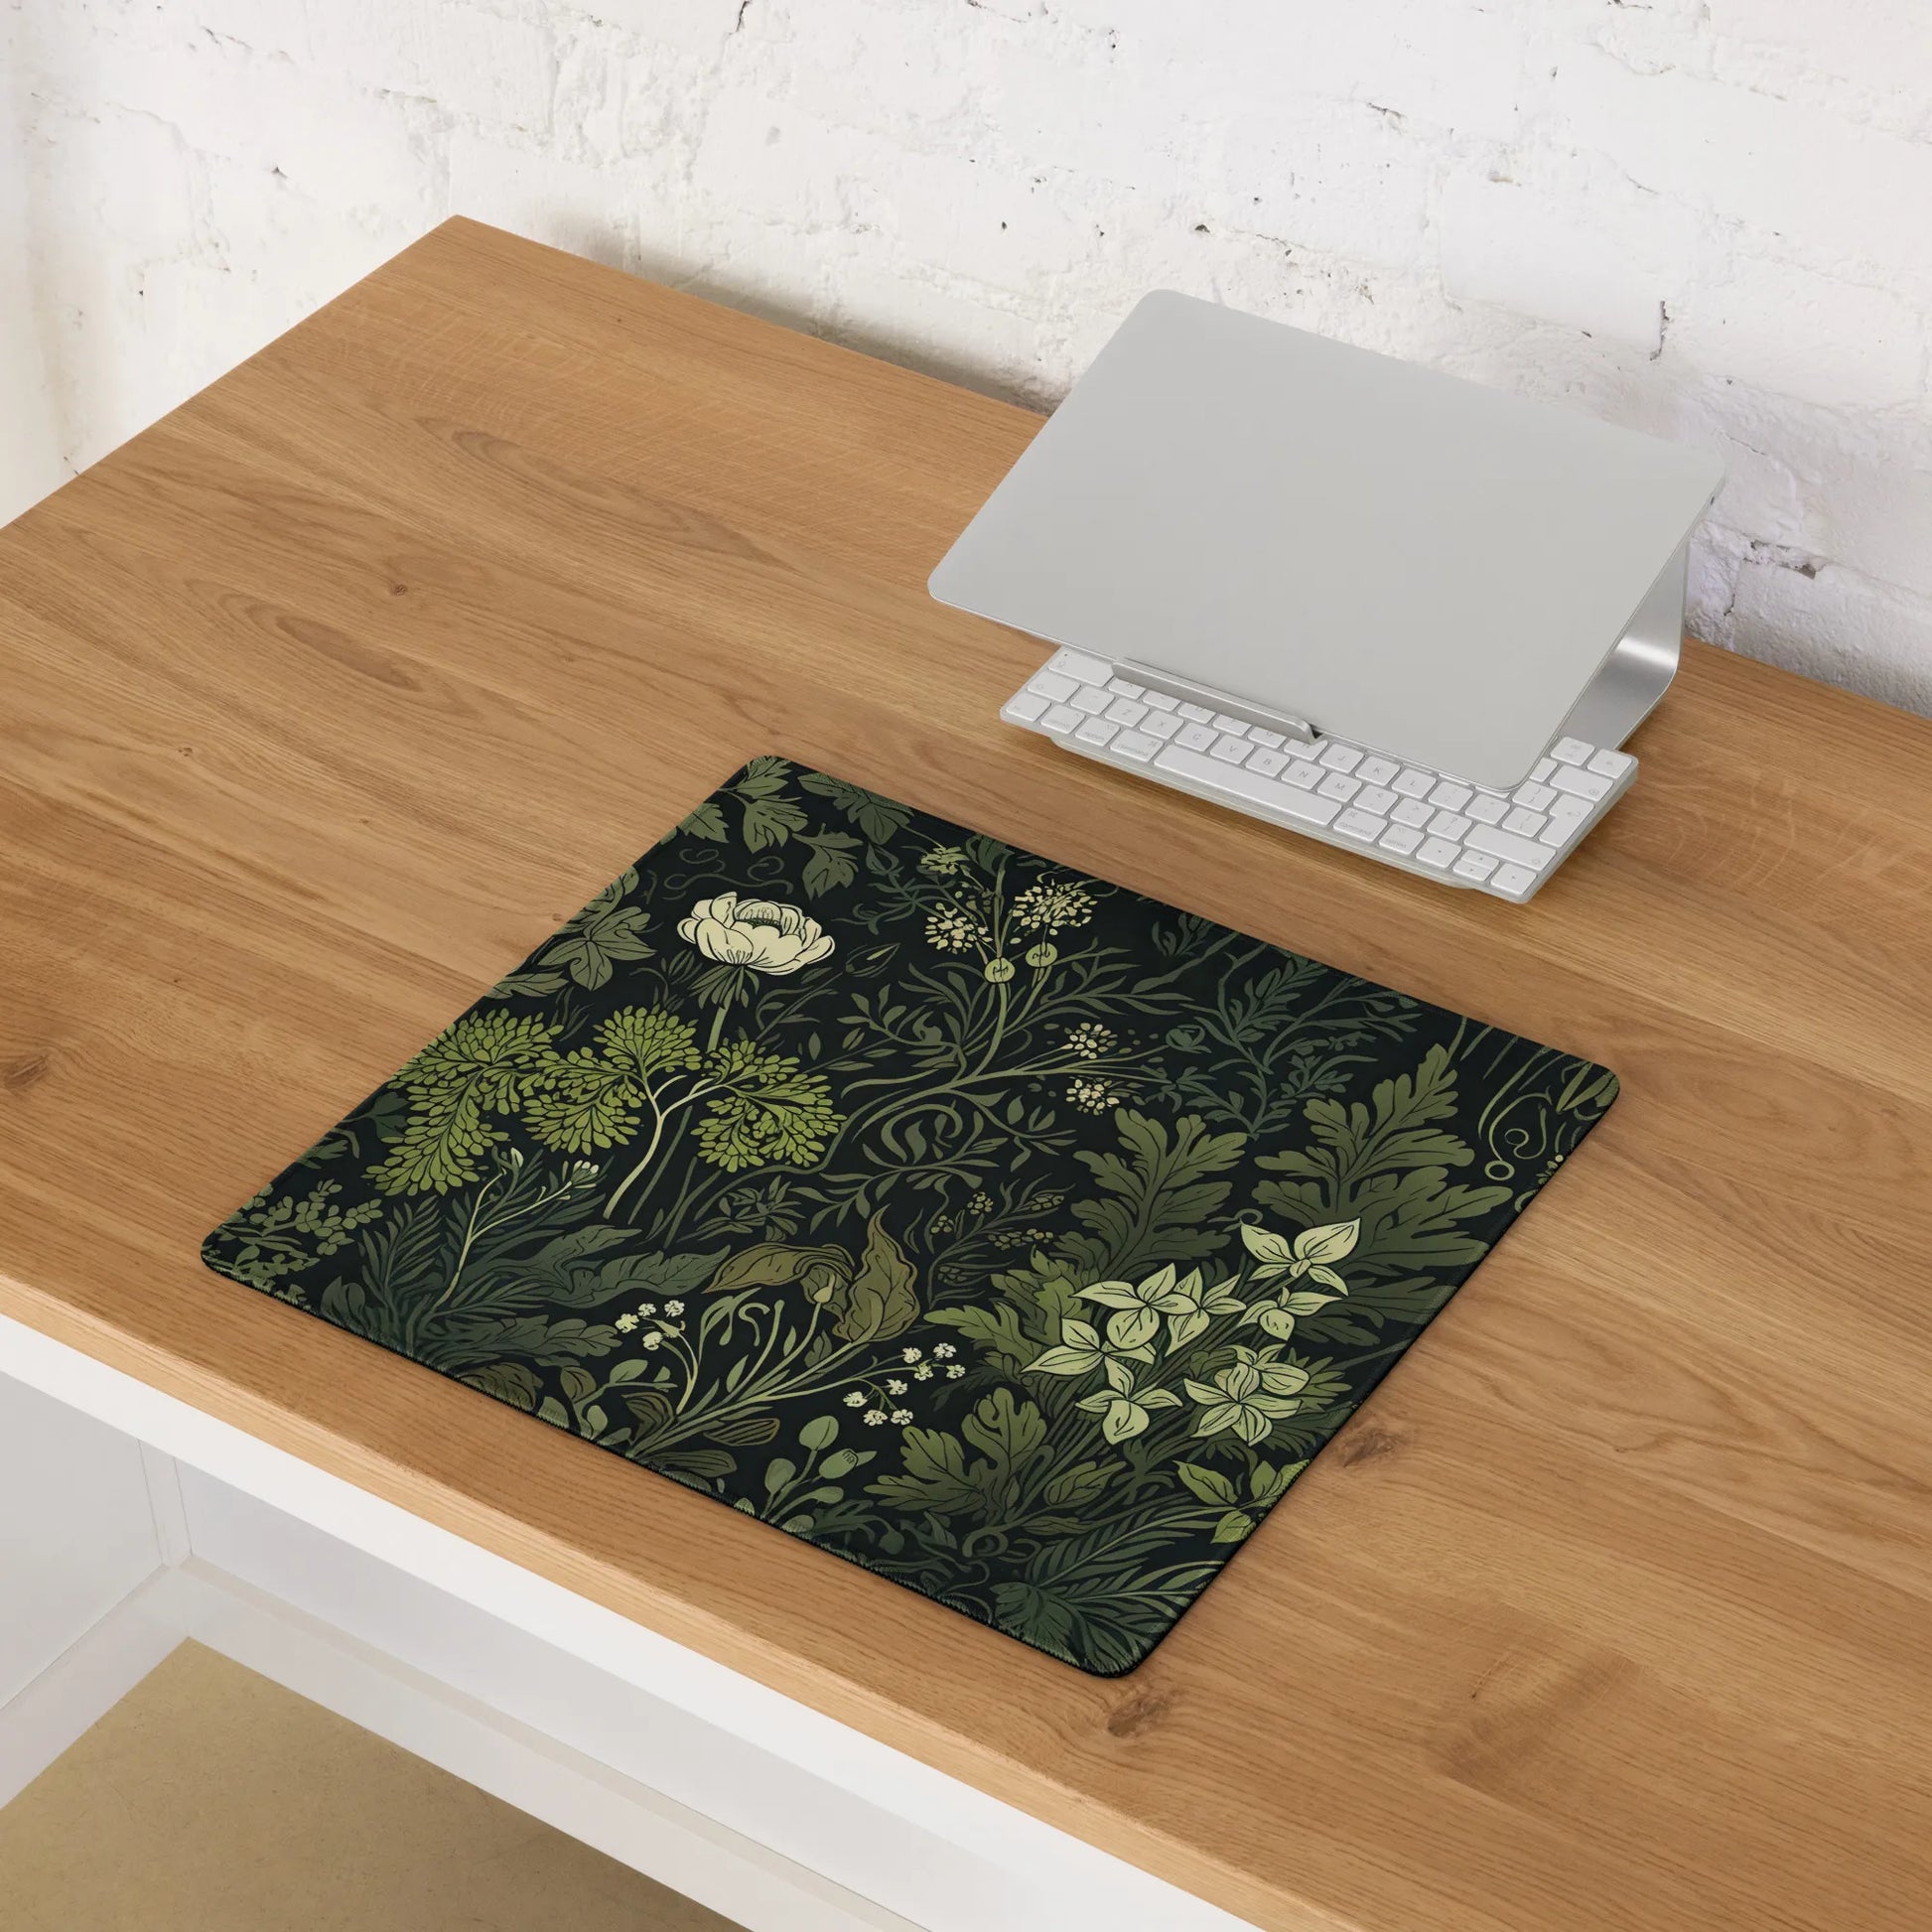 Overhead view of a compact dark green floral-themed desk mat with intricate botanical illustrations on a wooden desk, featuring a laptop and keyboard.